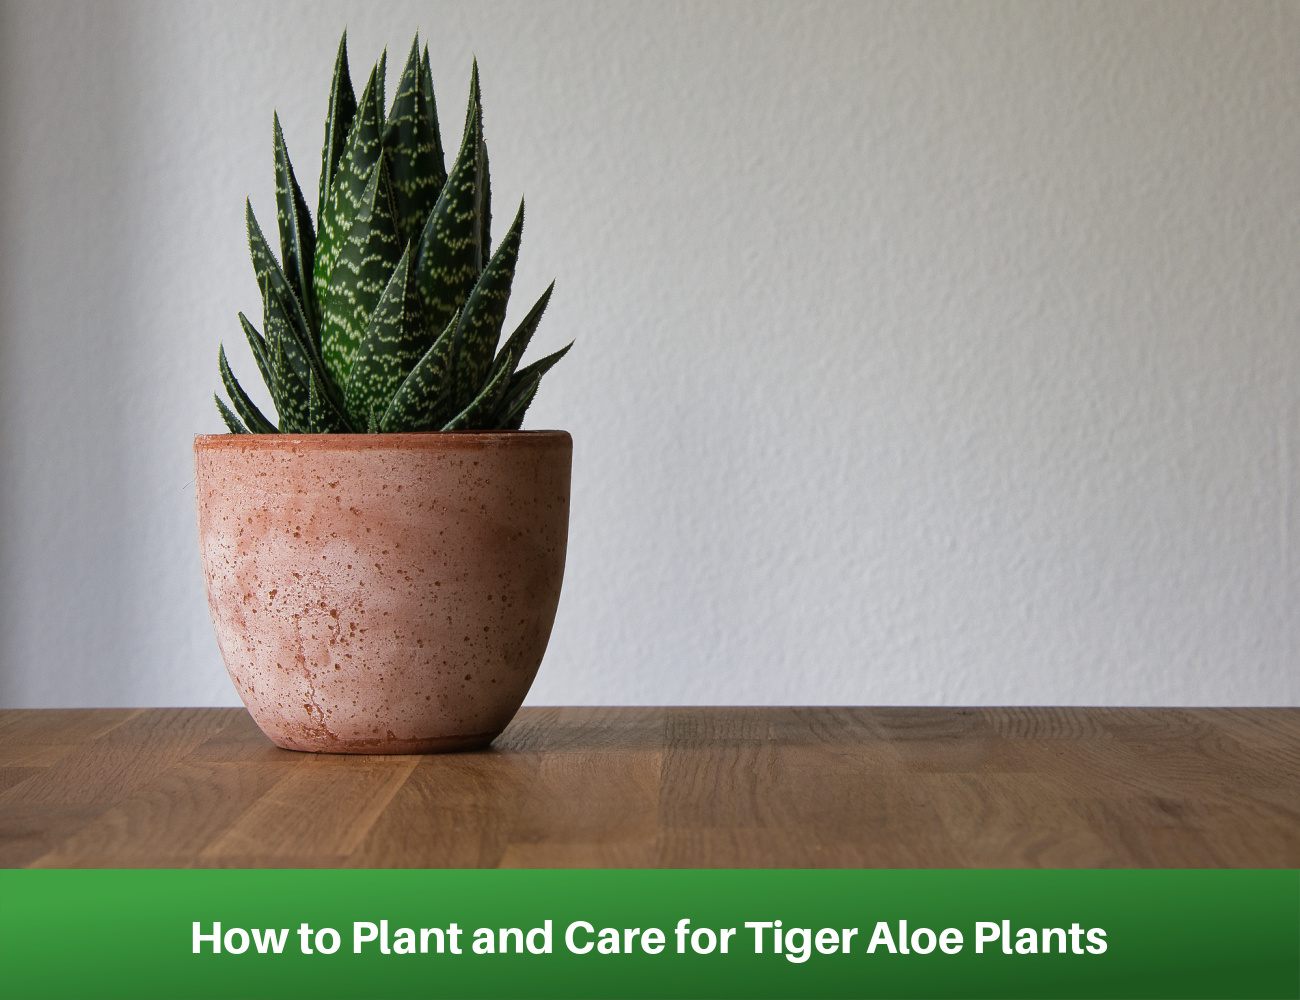 How to Plant and Care for Tiger Aloe Plants